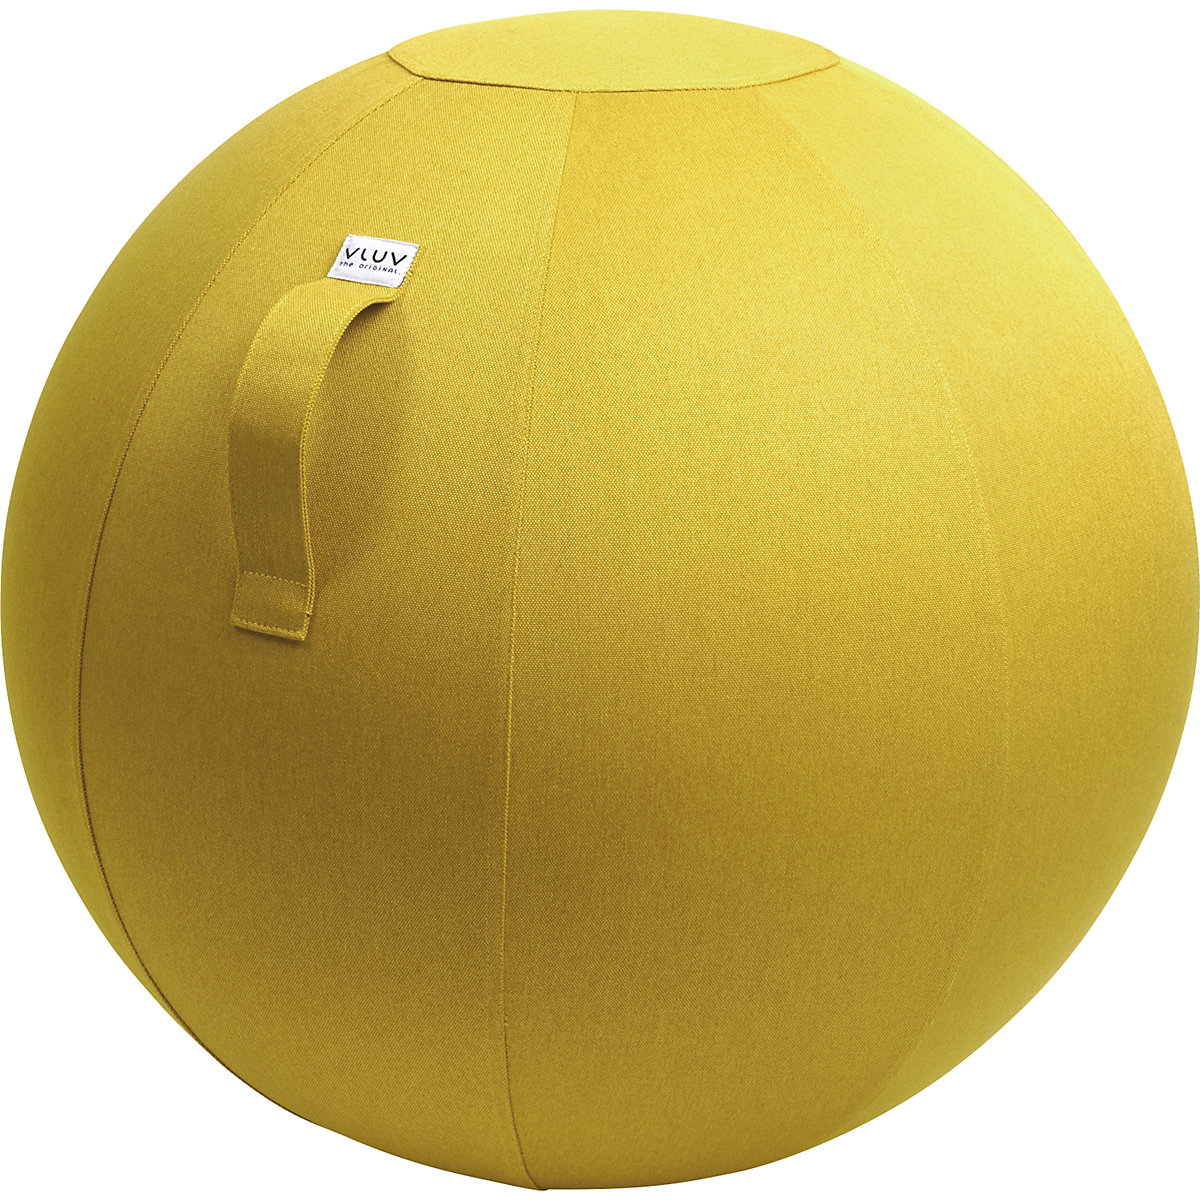 LEIV Swiss ball – VLUV, fabric cover with the appearance of canvas, 600 – 650 mm, mustard yellow